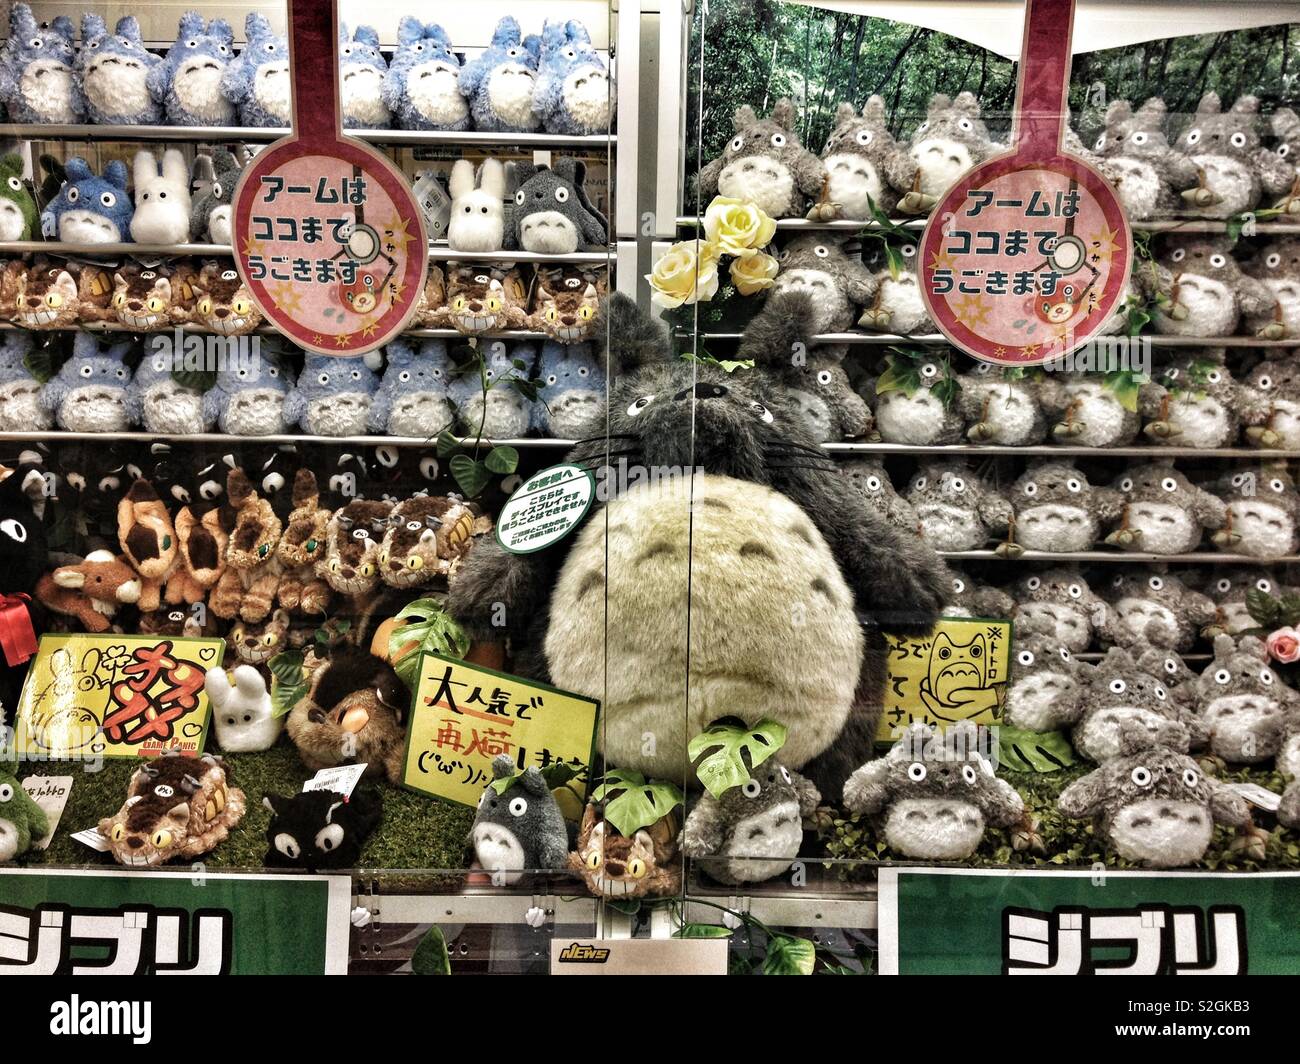 A large stuffed Totoro surrounded by smaller Totoros, cat buses and Jijis Stock Photo